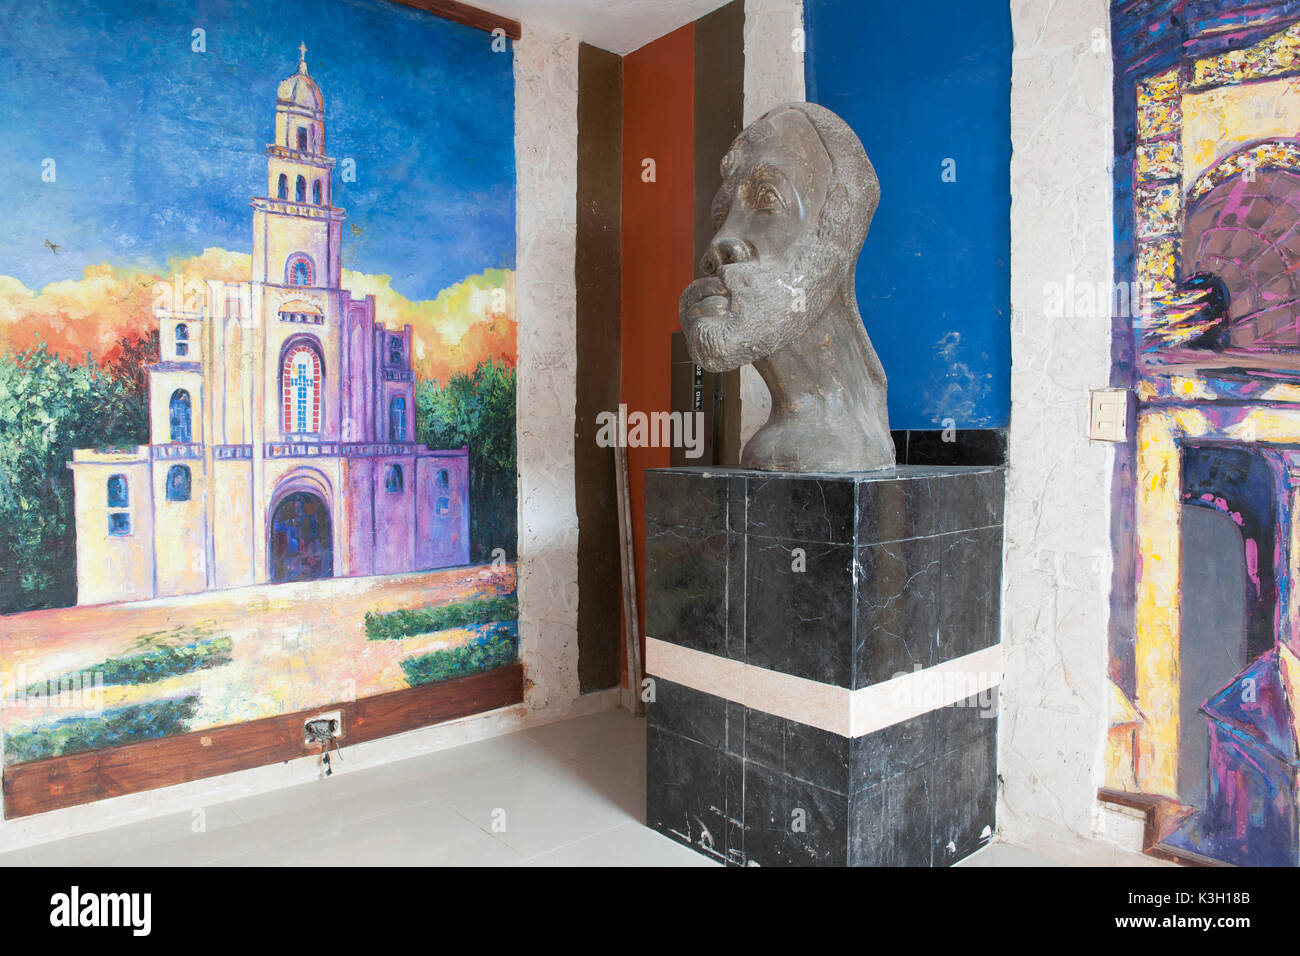 The Dominican Republic, north coast, Sosua, Castillo Mundo King, in 1991 from Rolf Schulz accommodates sketched the private collection of more than 1000 pieces of art from the neighbouring state Haiti. Here Haitian stone sculpture and painting. Stock Photo